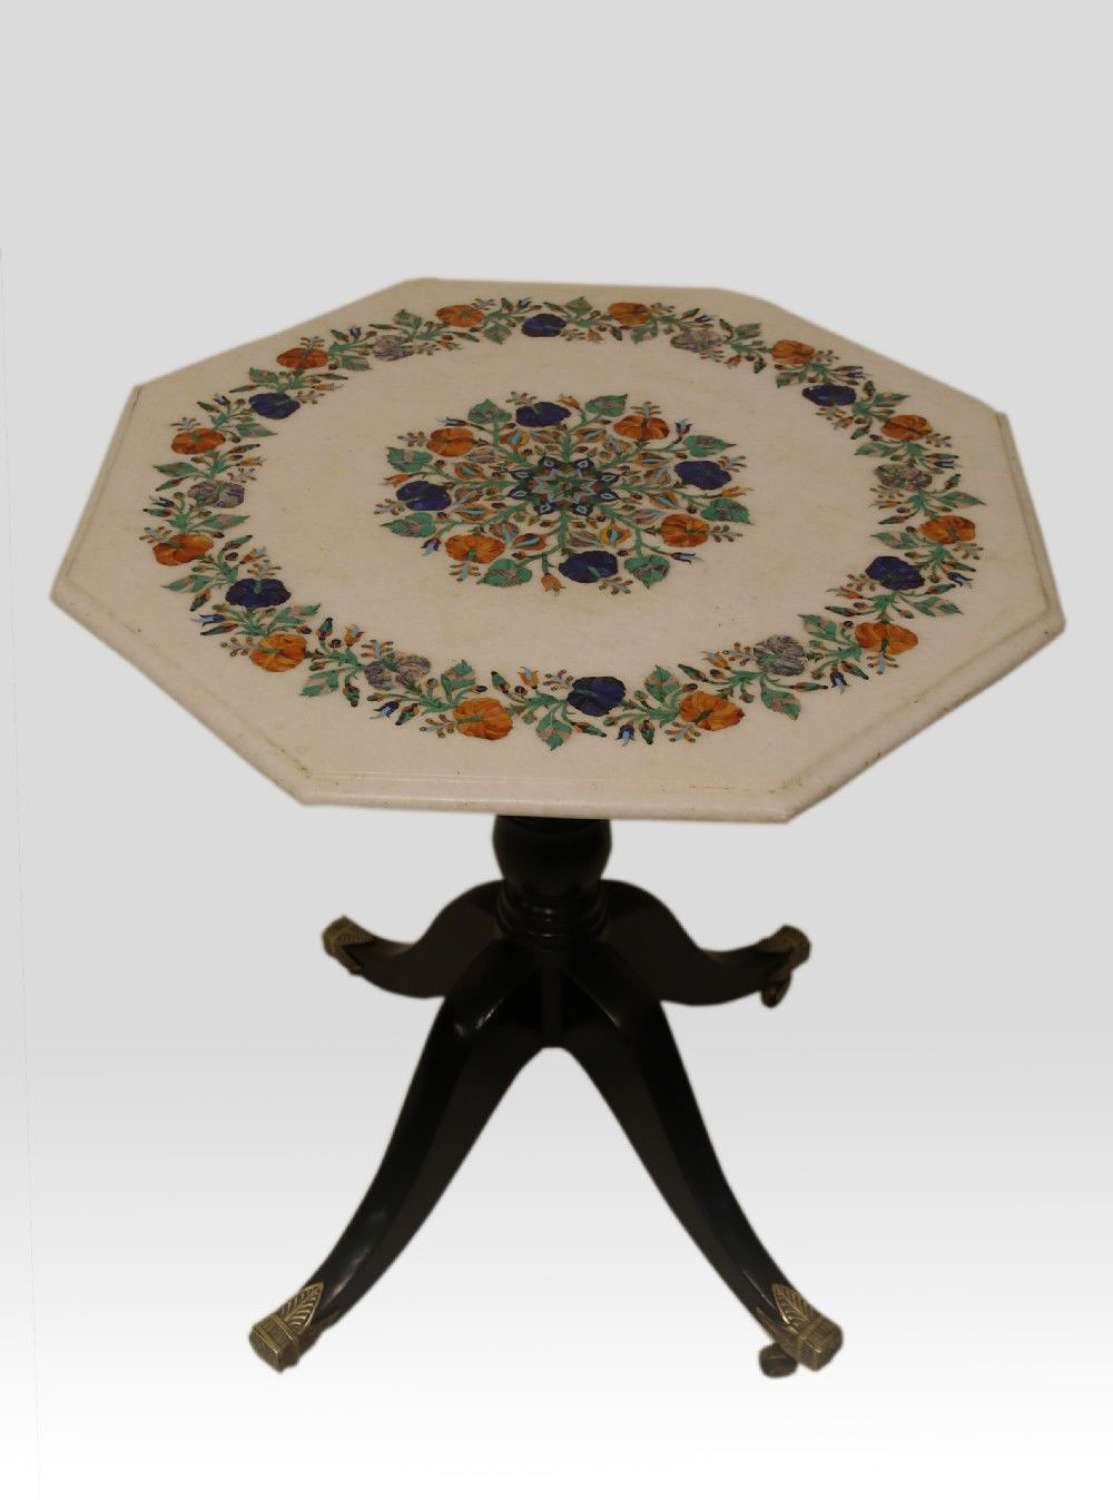 Exquisite Pietra Dura Marble Topped Table